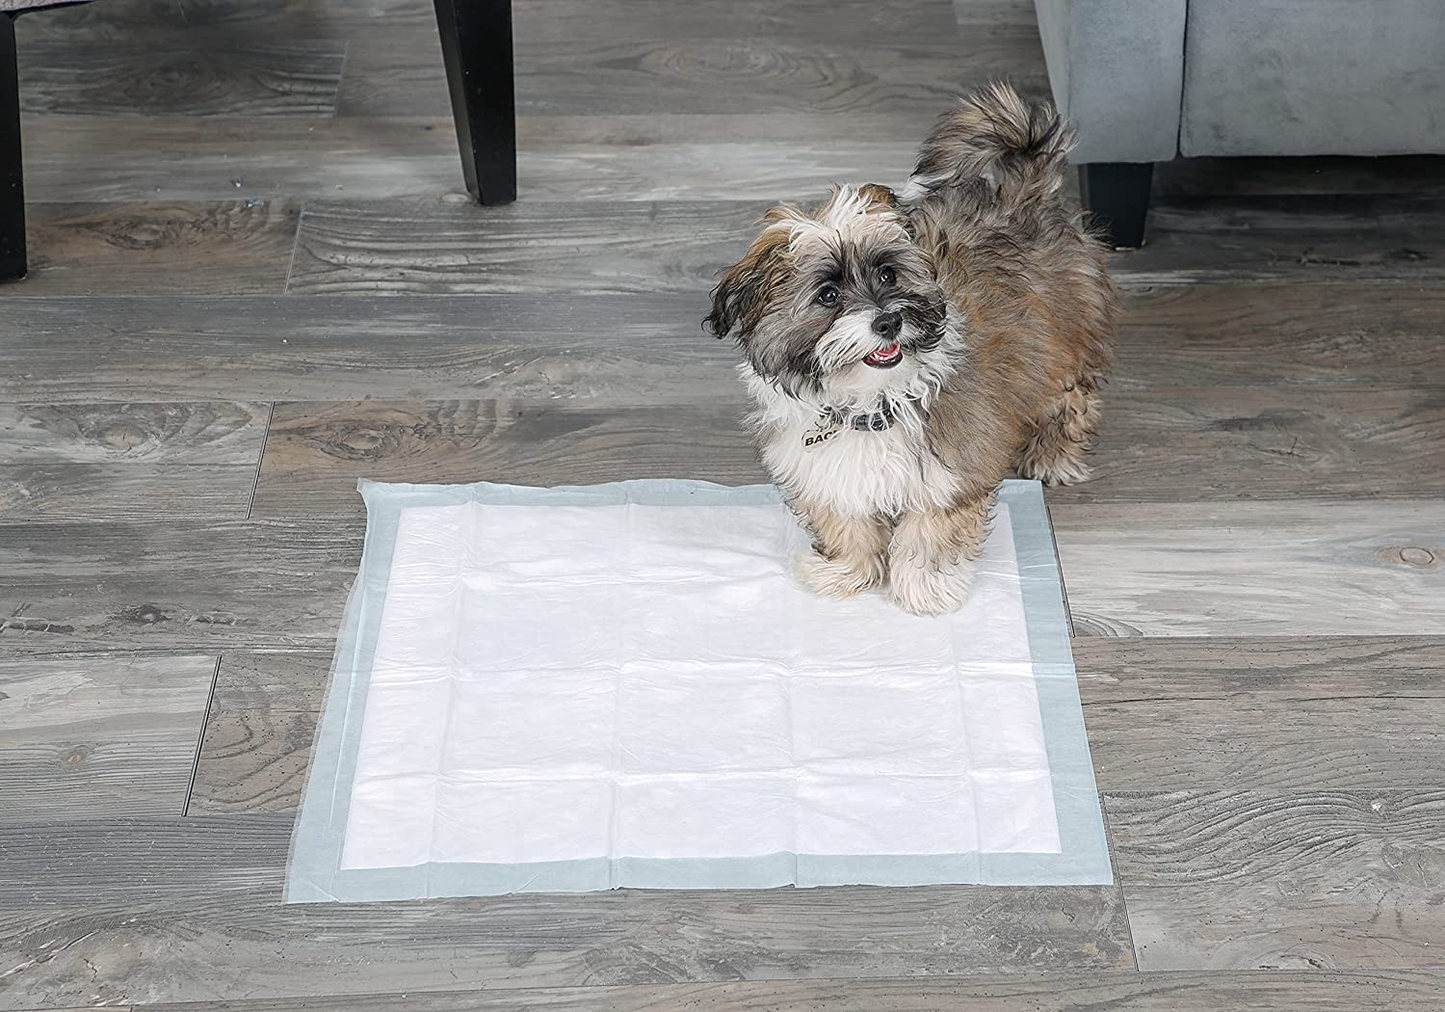 Hartz Home Protection Unscented Dog Pads, Super Absorbent & Won’T Leak, Pad Sizes & Package Counts Varies